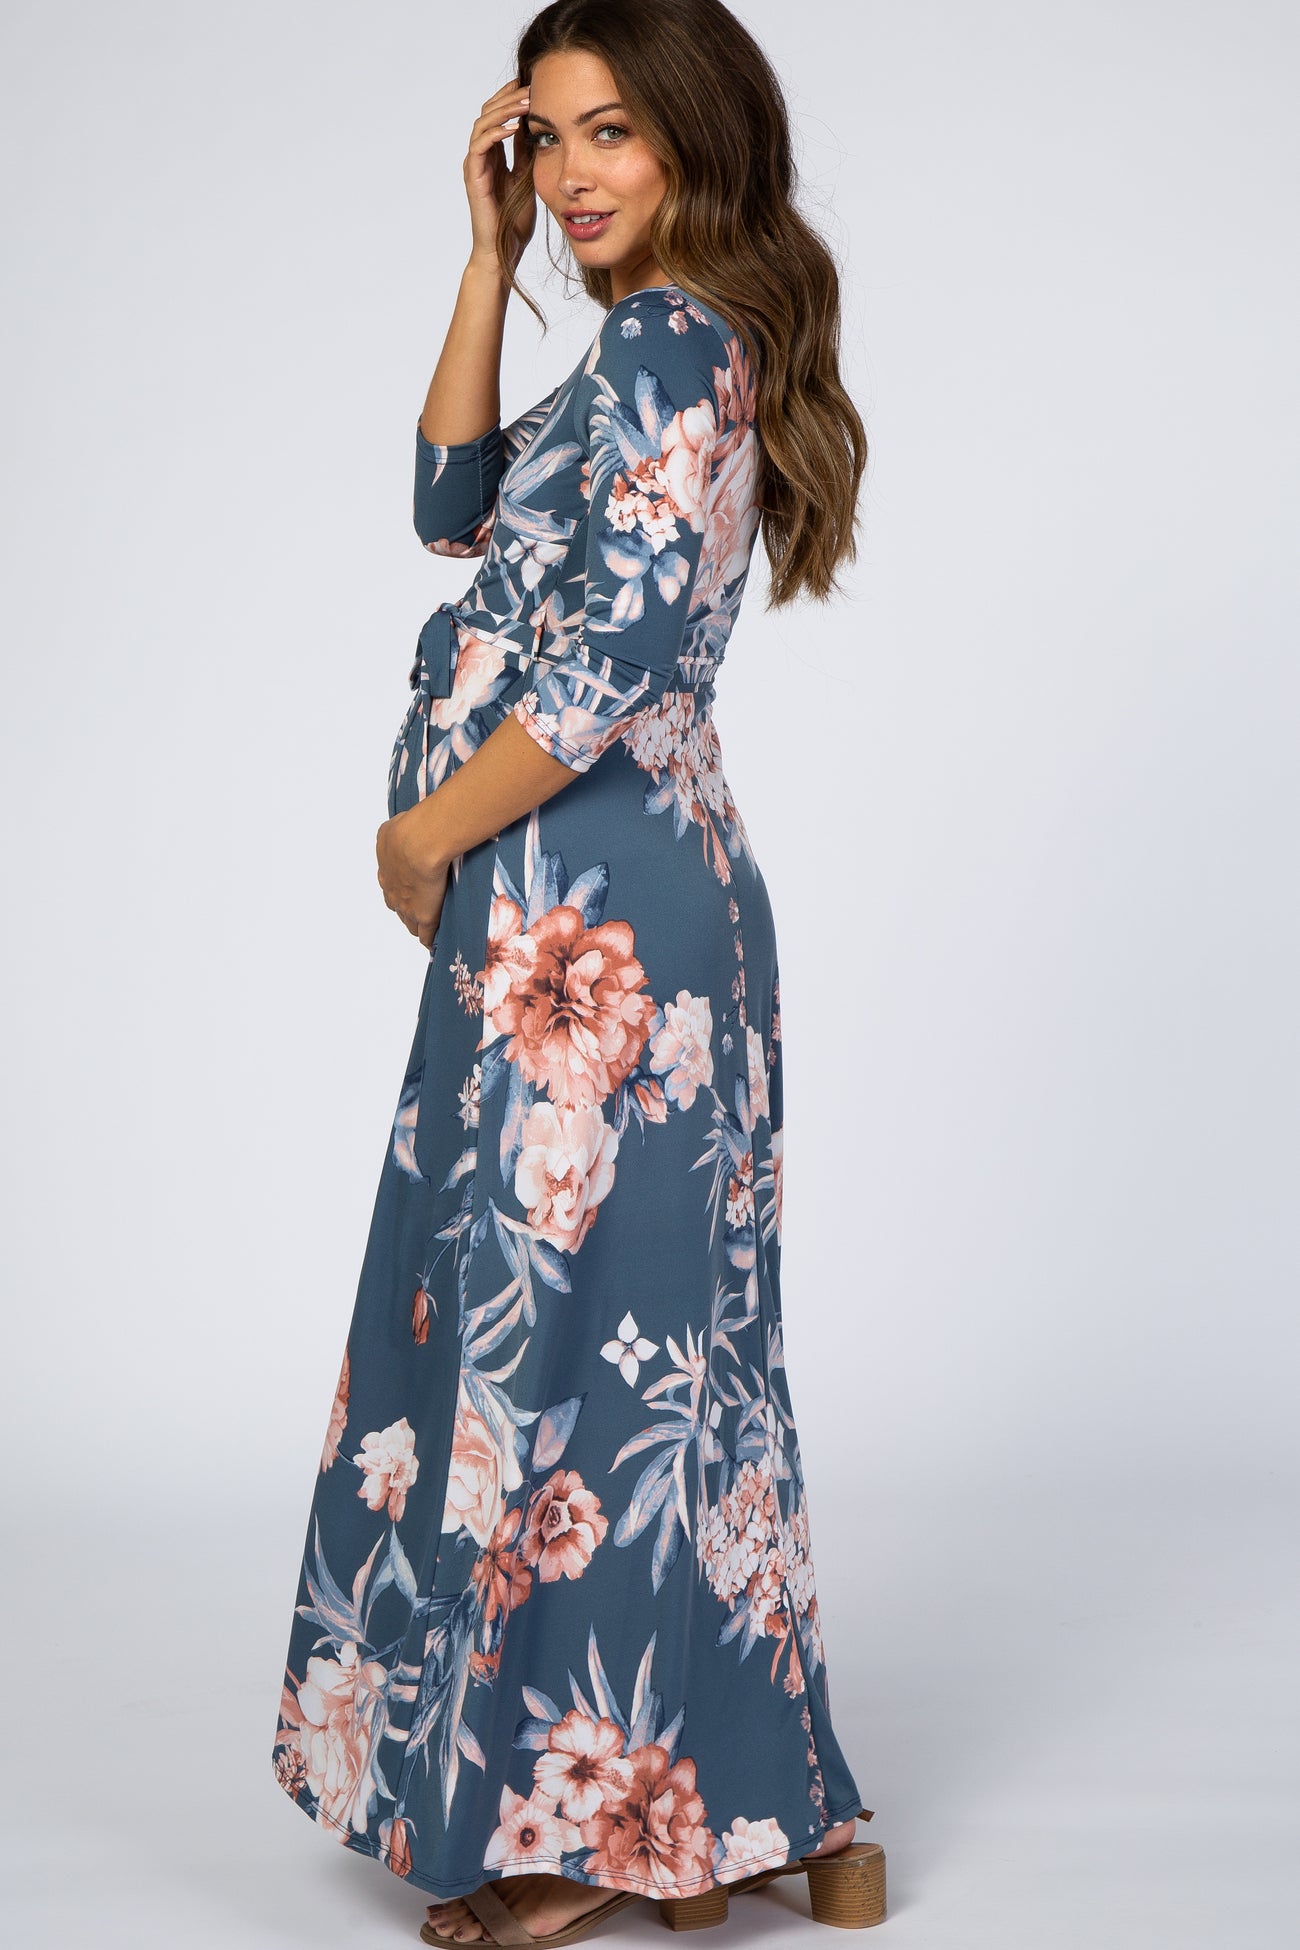 PinkBlush Navy Neon Floral Print Fitted Maternity Dress